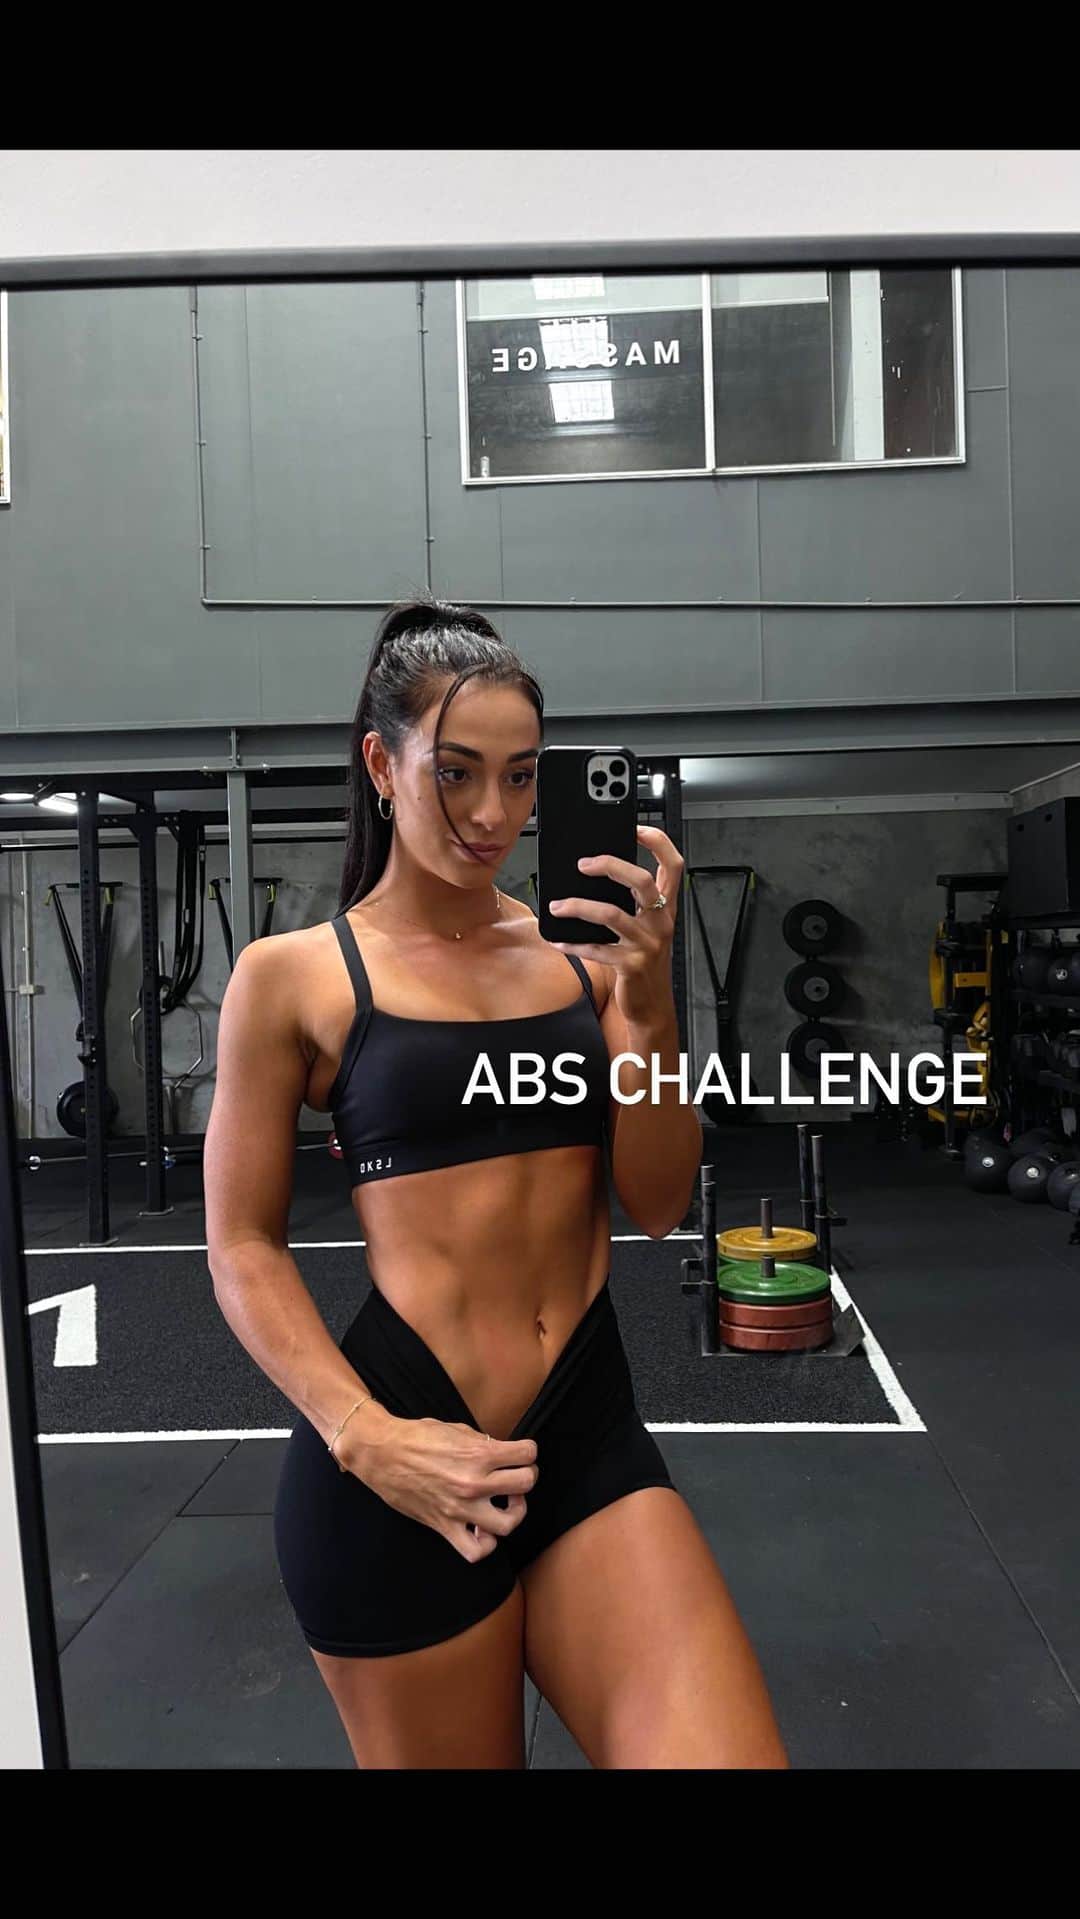 Danielle Robertsonのインスタグラム：「AB CHALLENGE!   Have you joined our 3 week ab challenge?! If you’re looking for quick and effective ab workouts, this challenge is for you 🔥  Our Ab Challenge is available in the @wrkoutwithdb app and for only $9.95 AUD you receive 14 different Ab workouts which can be completed on their own or if you’re already a member, you can add these circuits to your program as a finisher!  Click the link in my bio or head to dannibelle.com to sign up and receive instant access to your workouts!   Give this circuit a try!   WORKOUT   3 SETS   30 sec work: 15 sec rest   - Scissor Kicks - Mountain Climbers - V-Sits - Cross Body Ankle Taps  - Bicycles   60 - 90 sec rest between sets」